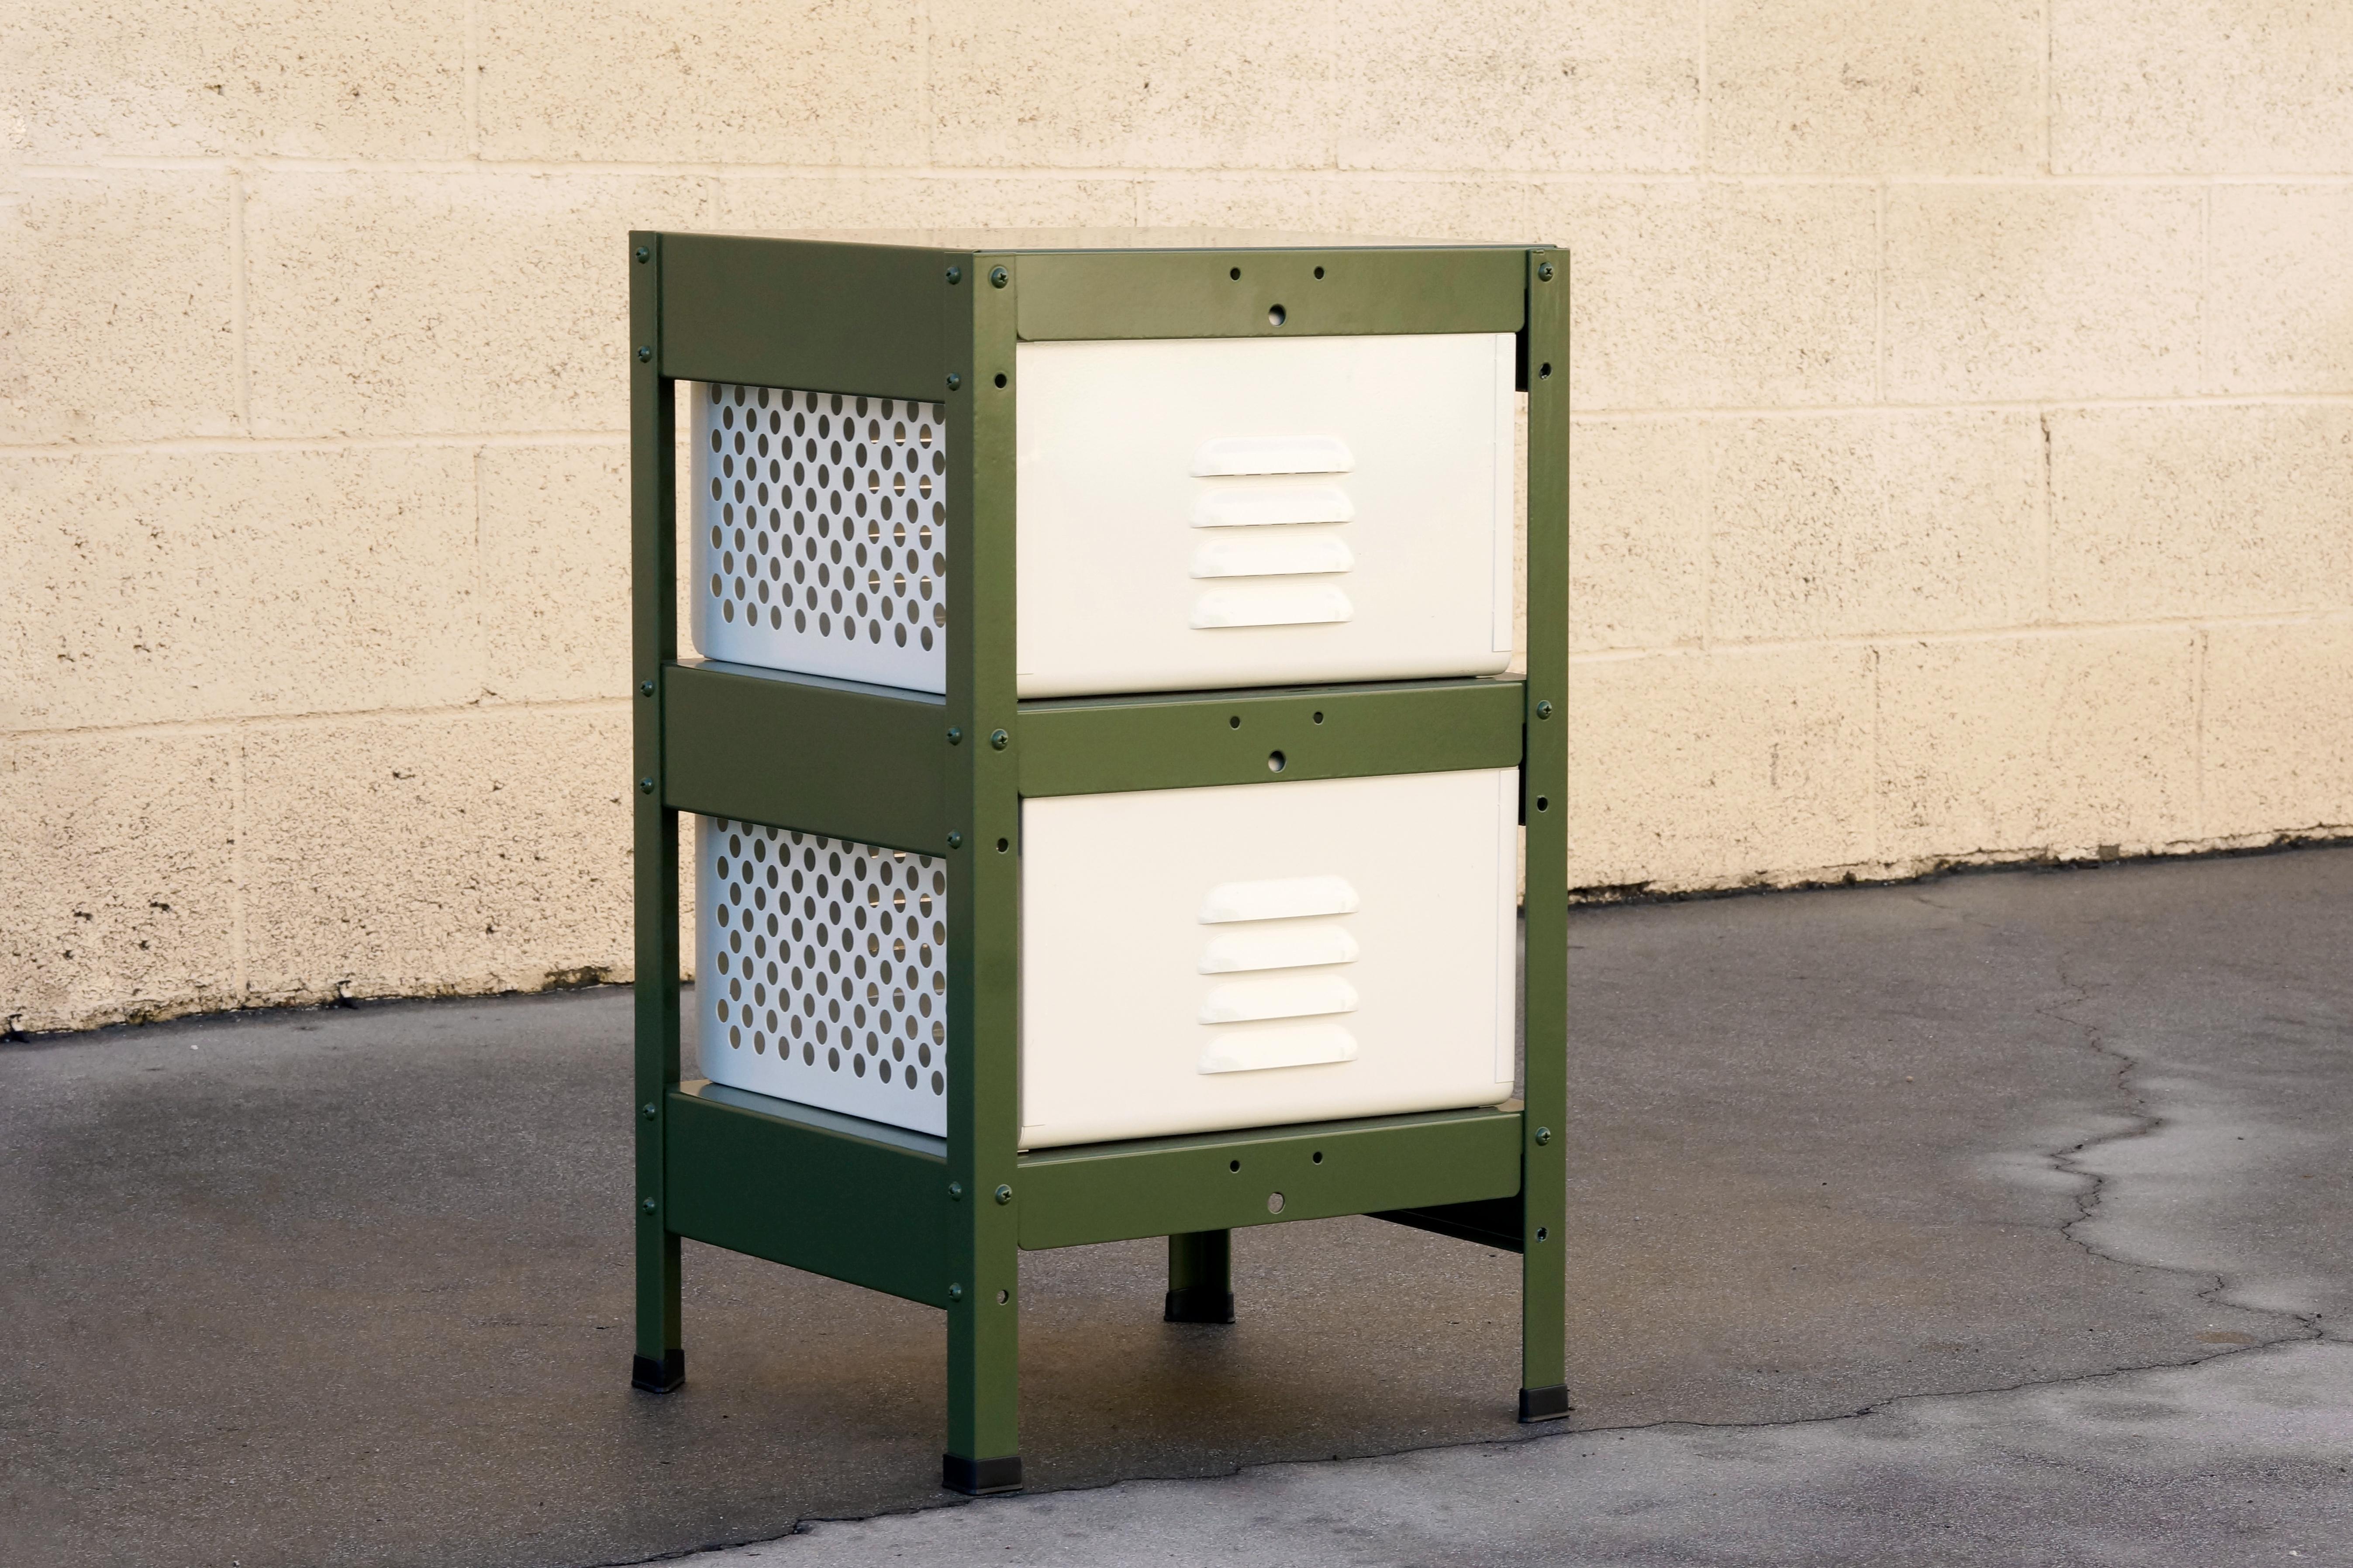 Our newly fabricated locker basket units are inspired by the midcentury classics we've been refinishing for years. Featured here is a 1 x 2 unit with pearl baskets and an army green frame. It's the perfect storage solution for anything from tools,